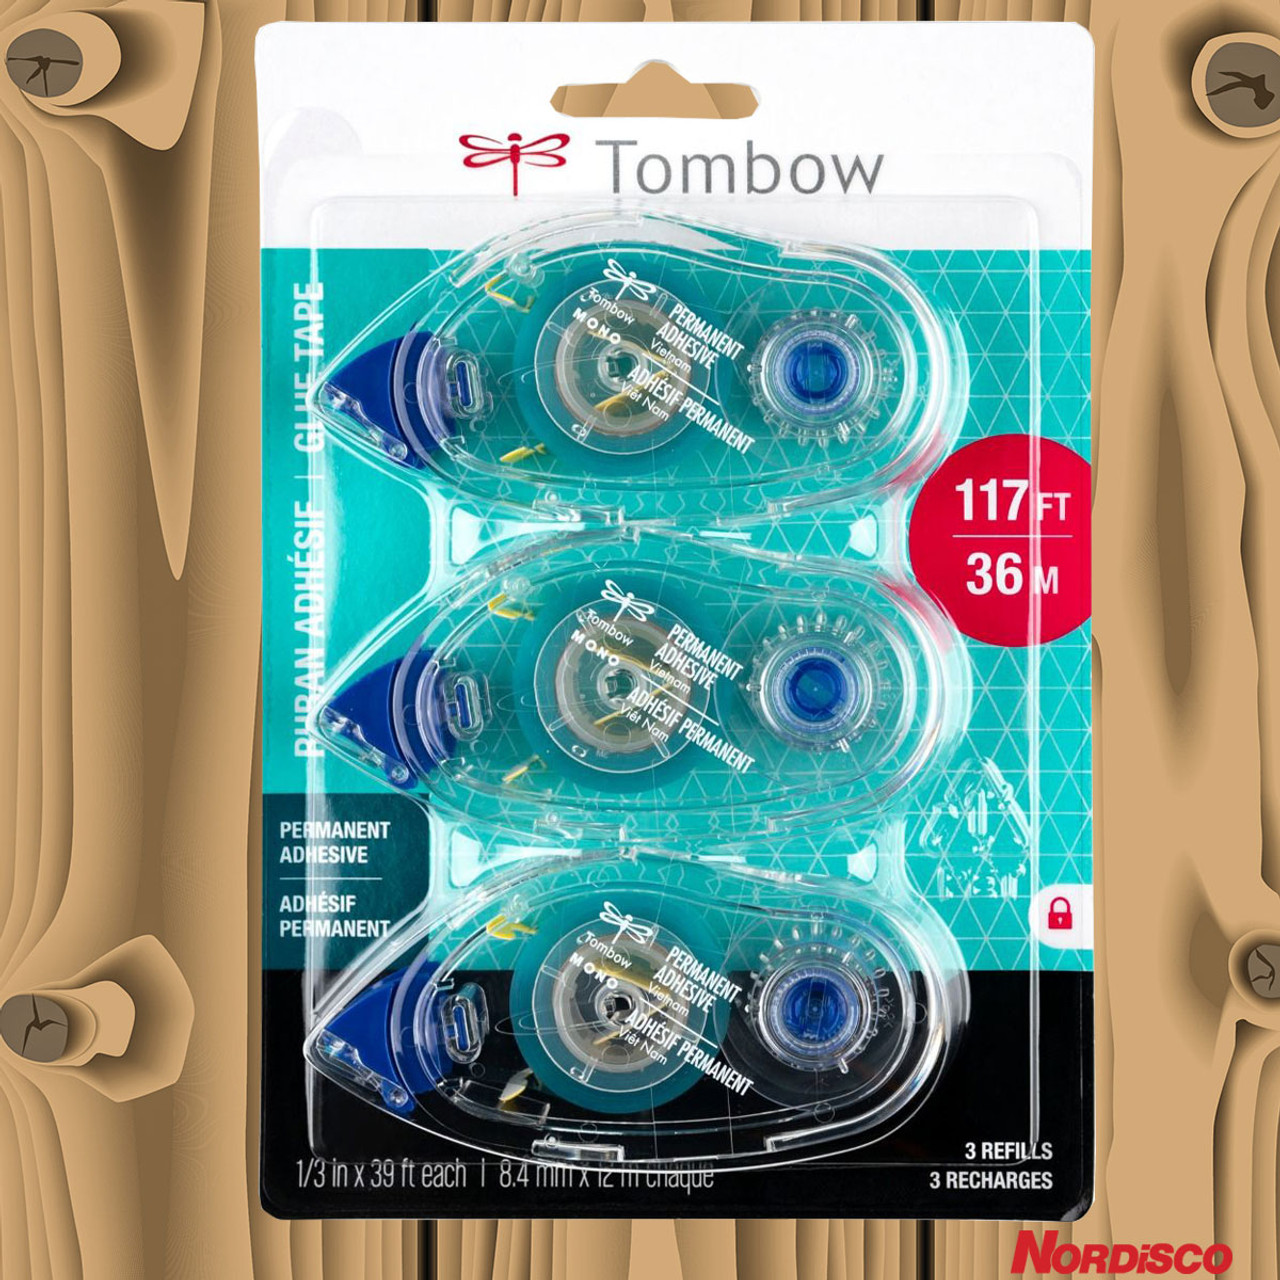 Tombow MONO Adhesive Tapes & Refills